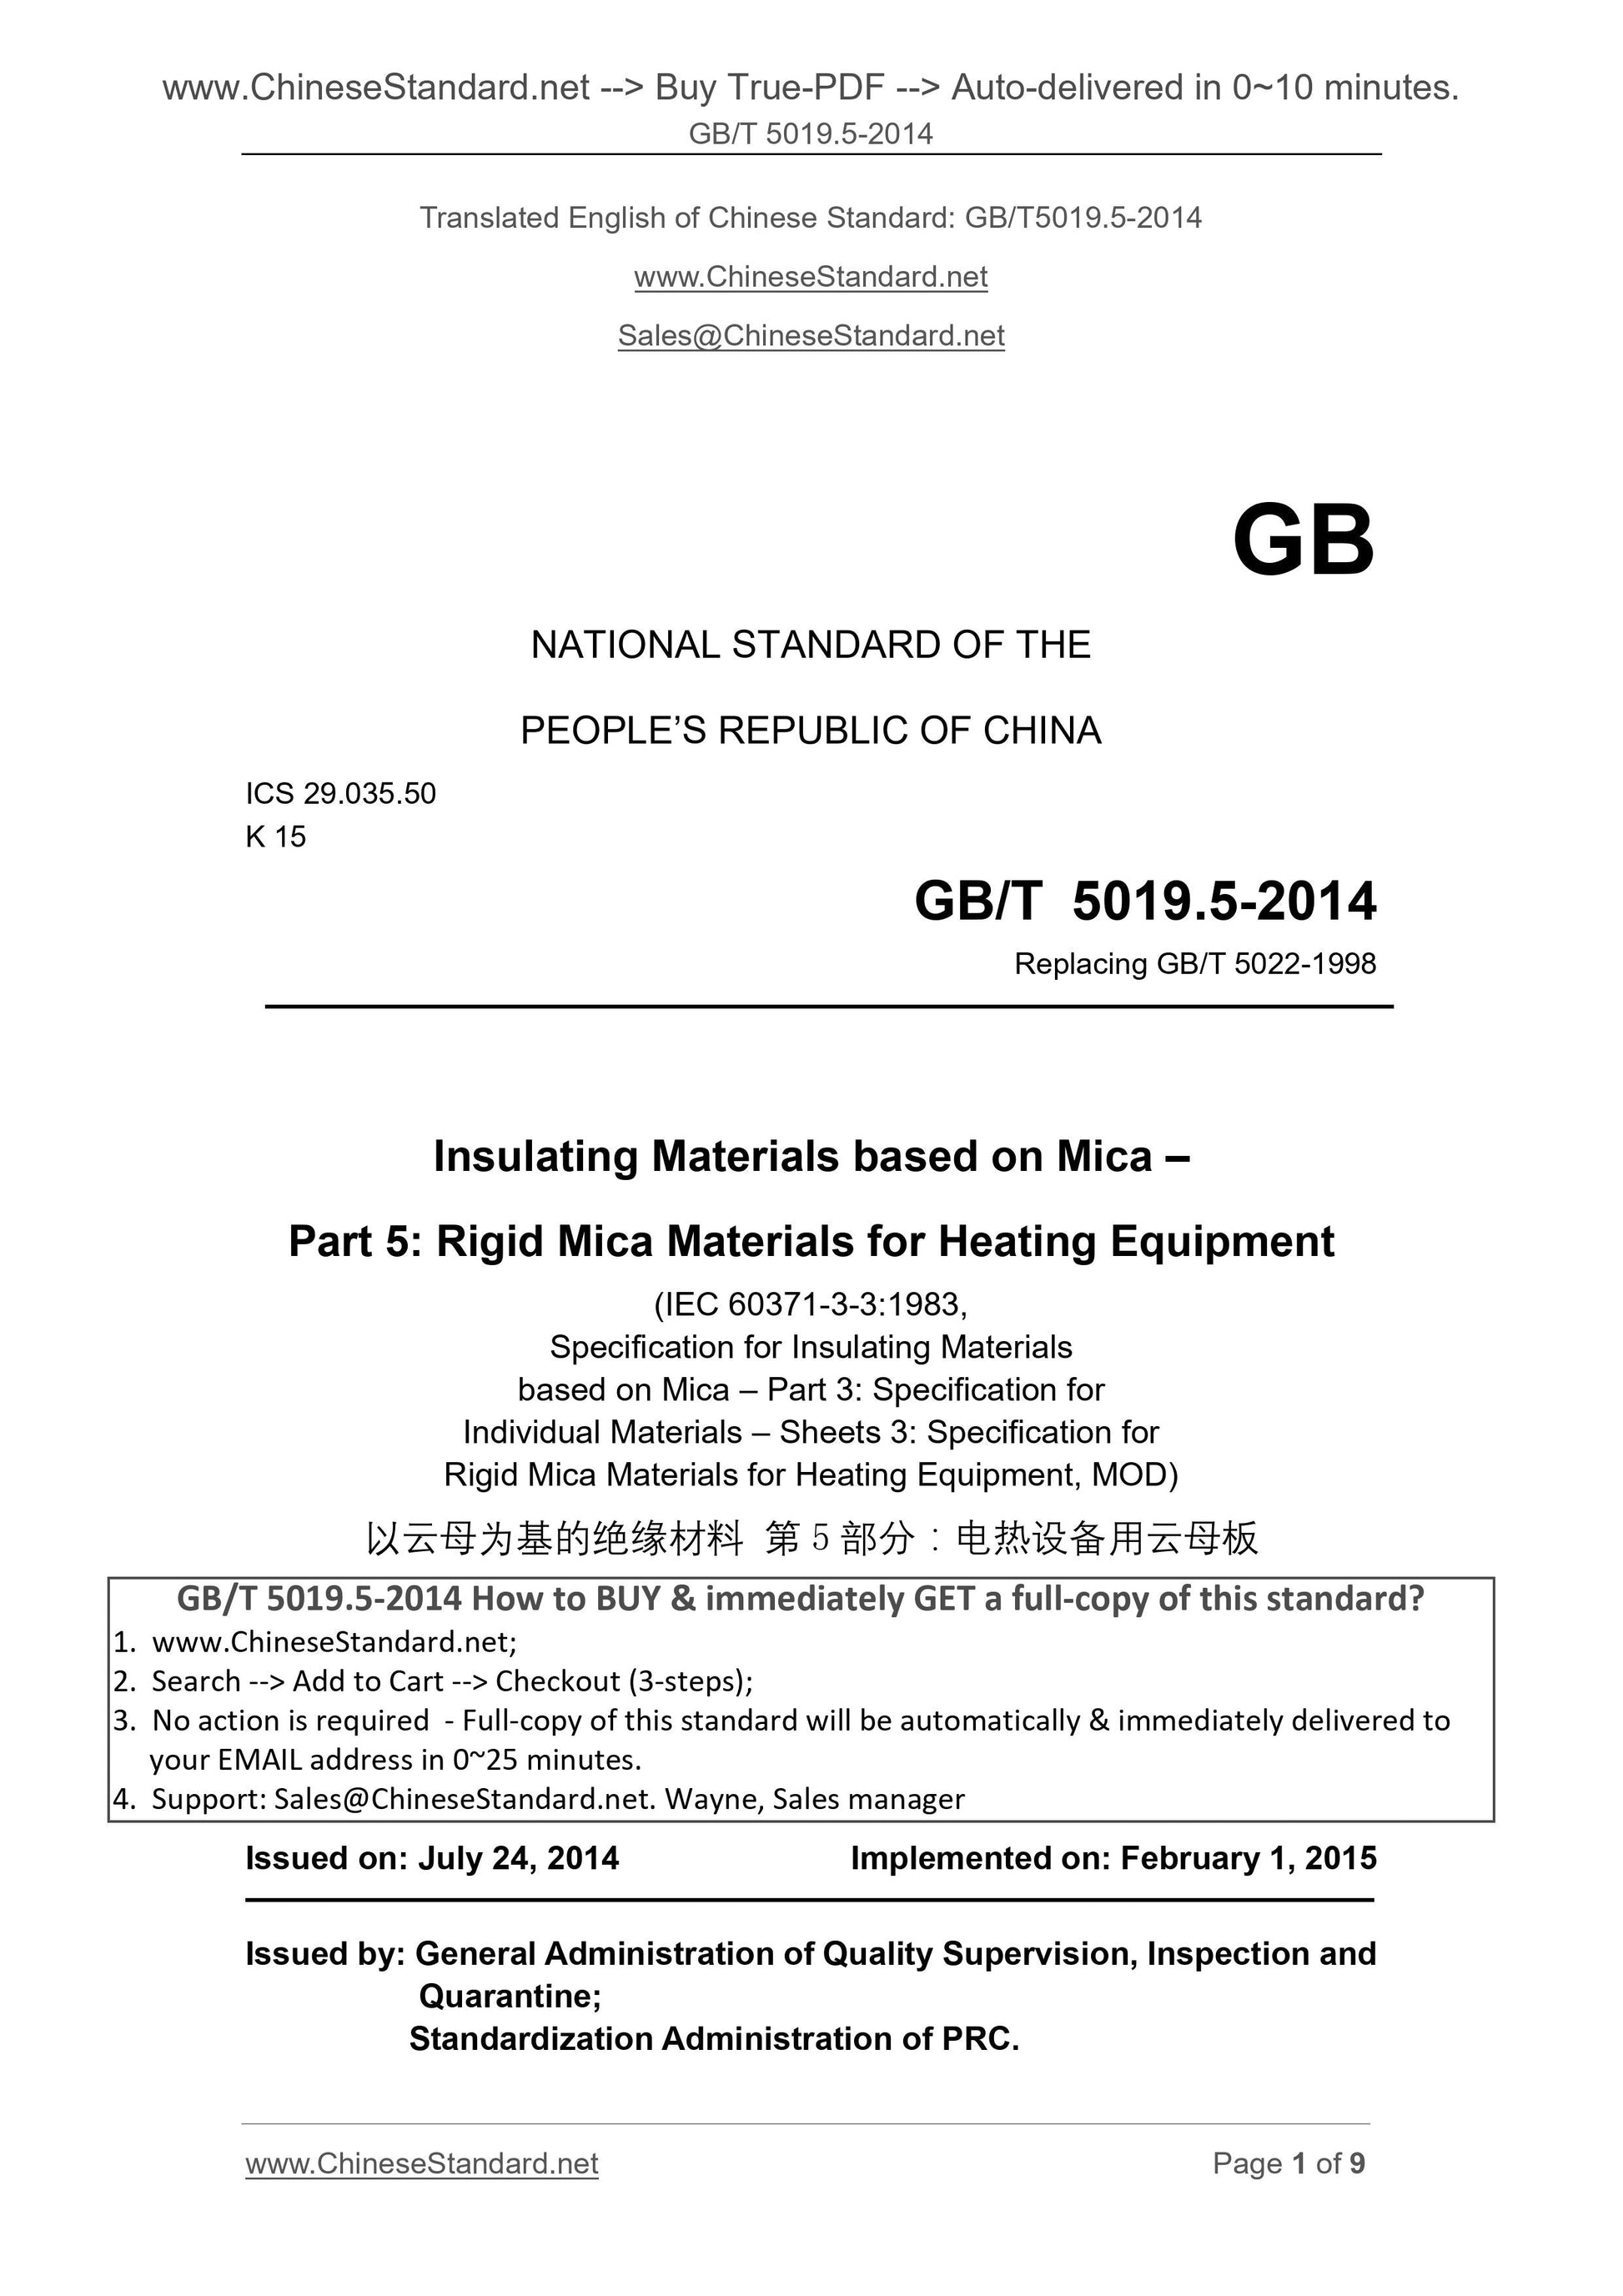 GB/T 5019.5-2014 Page 1